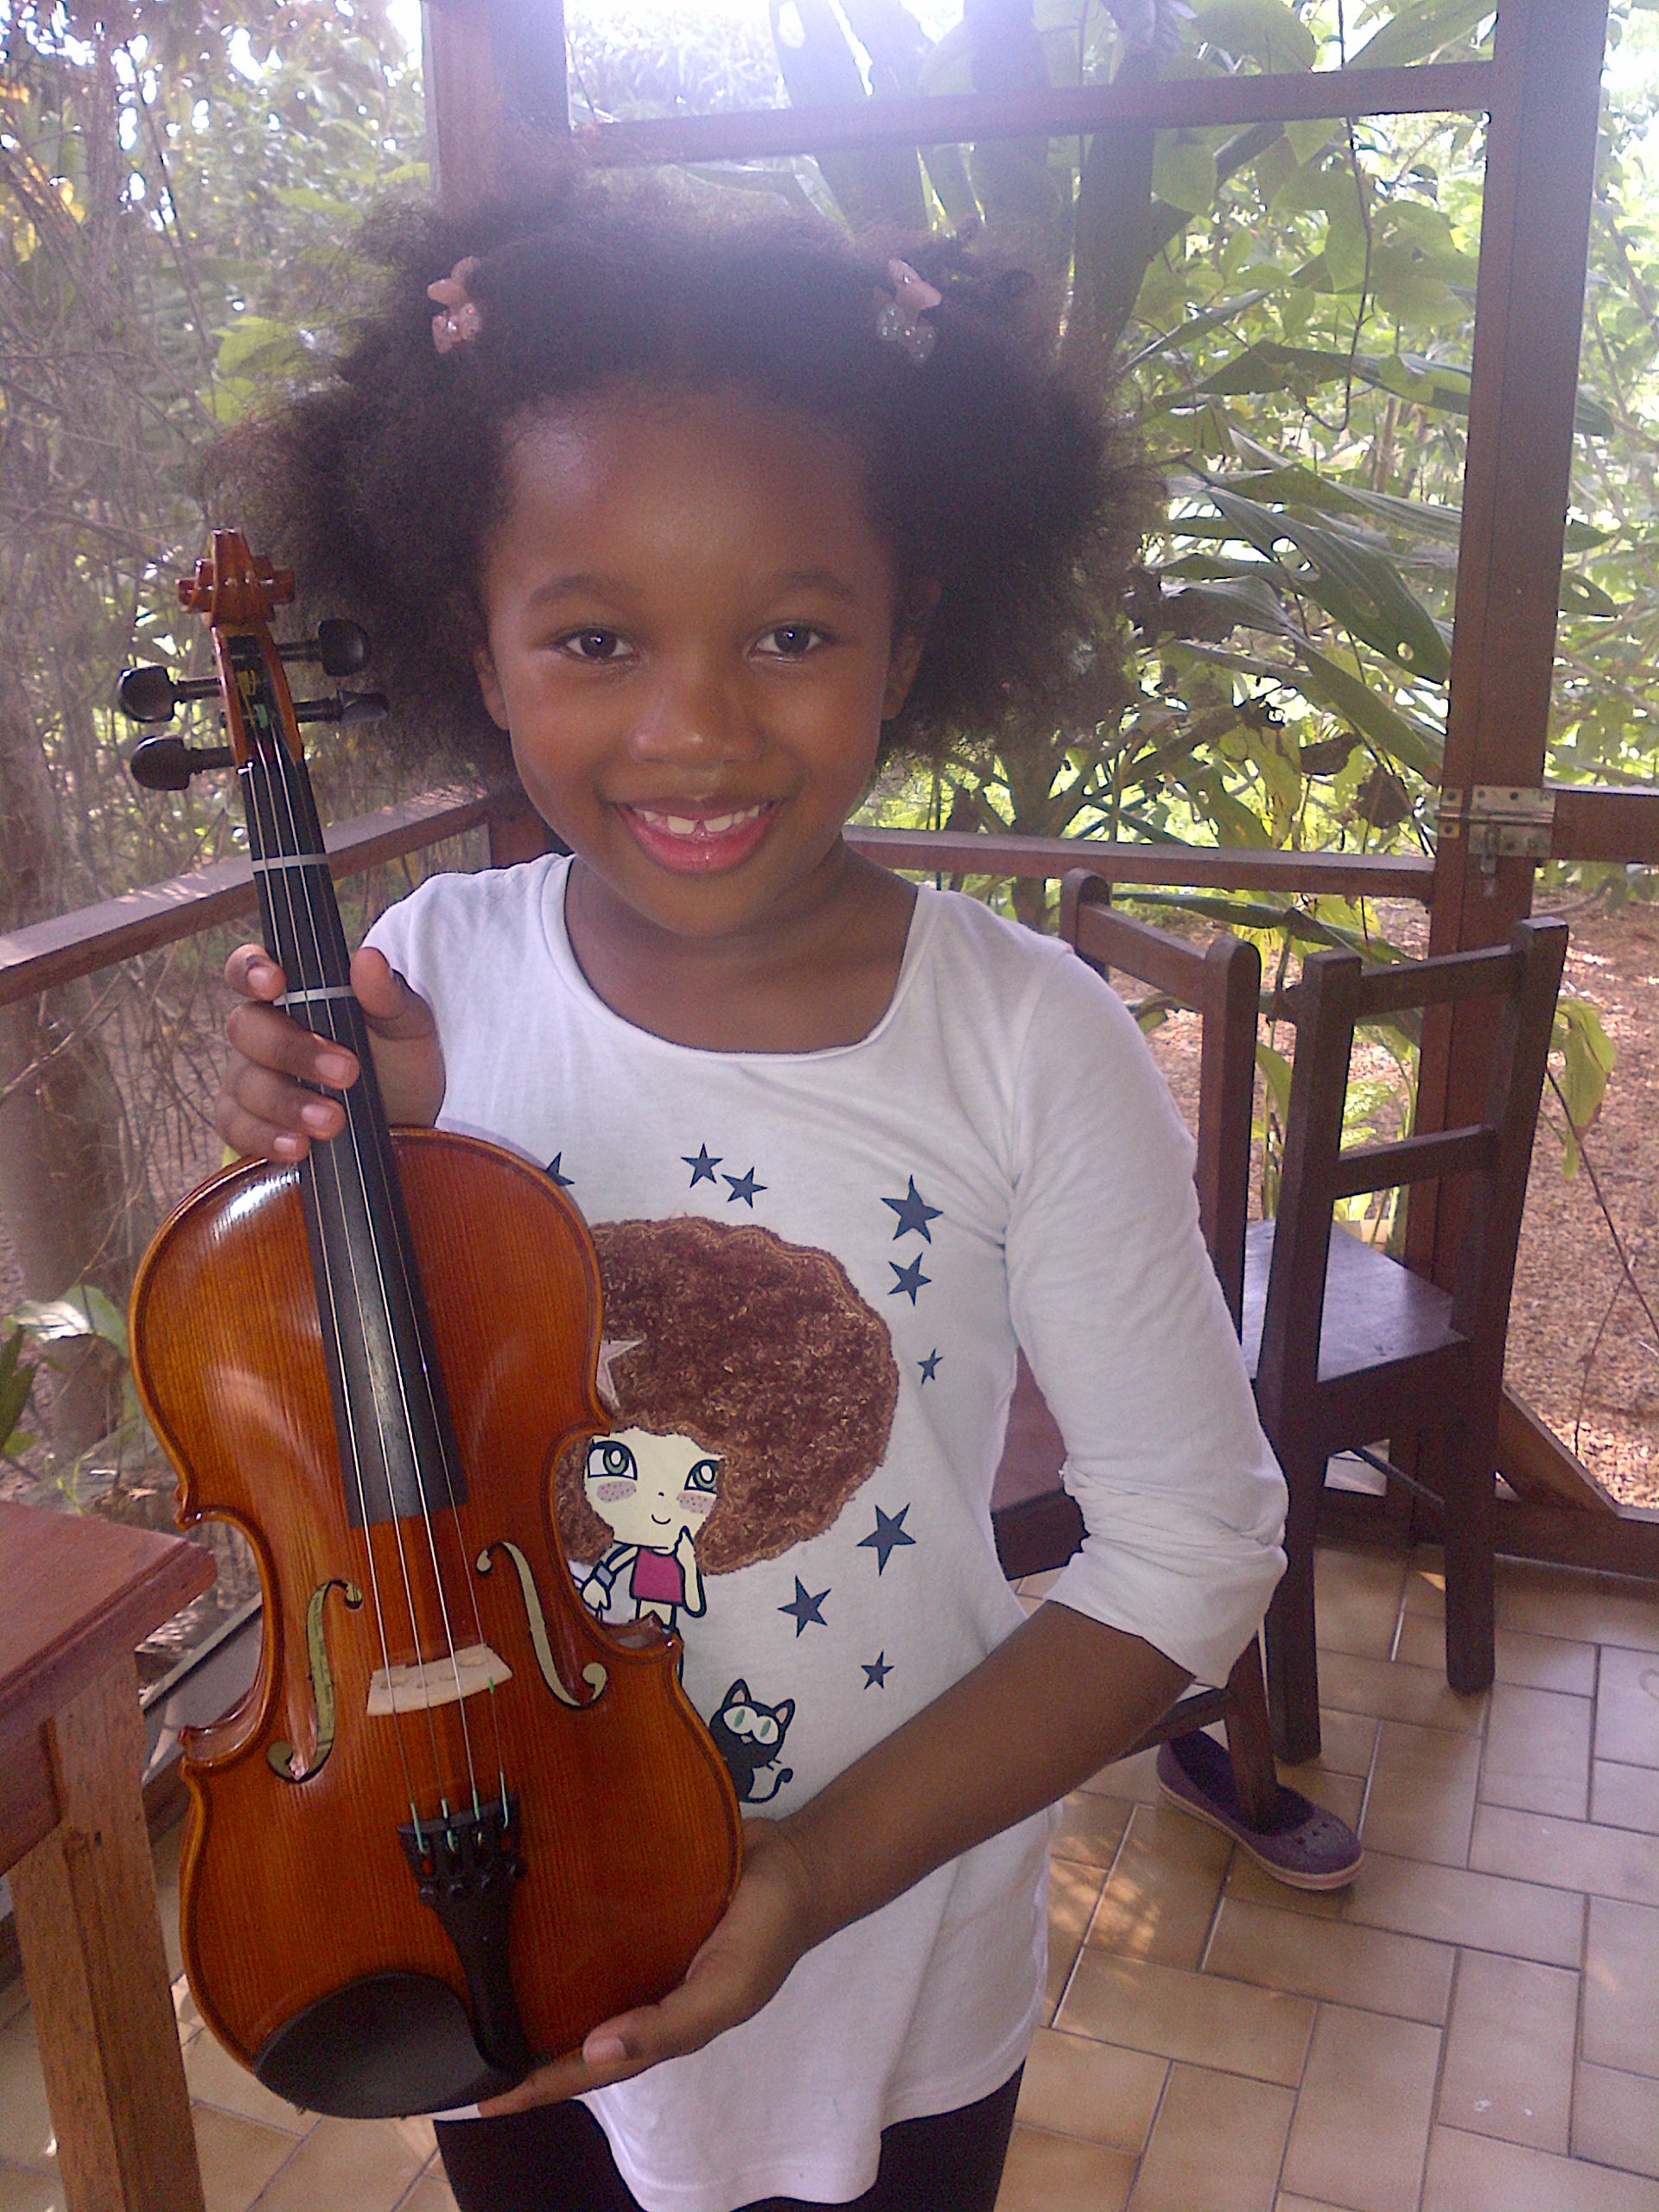 The day Cherissa received her violin and found out that Kate would teach her